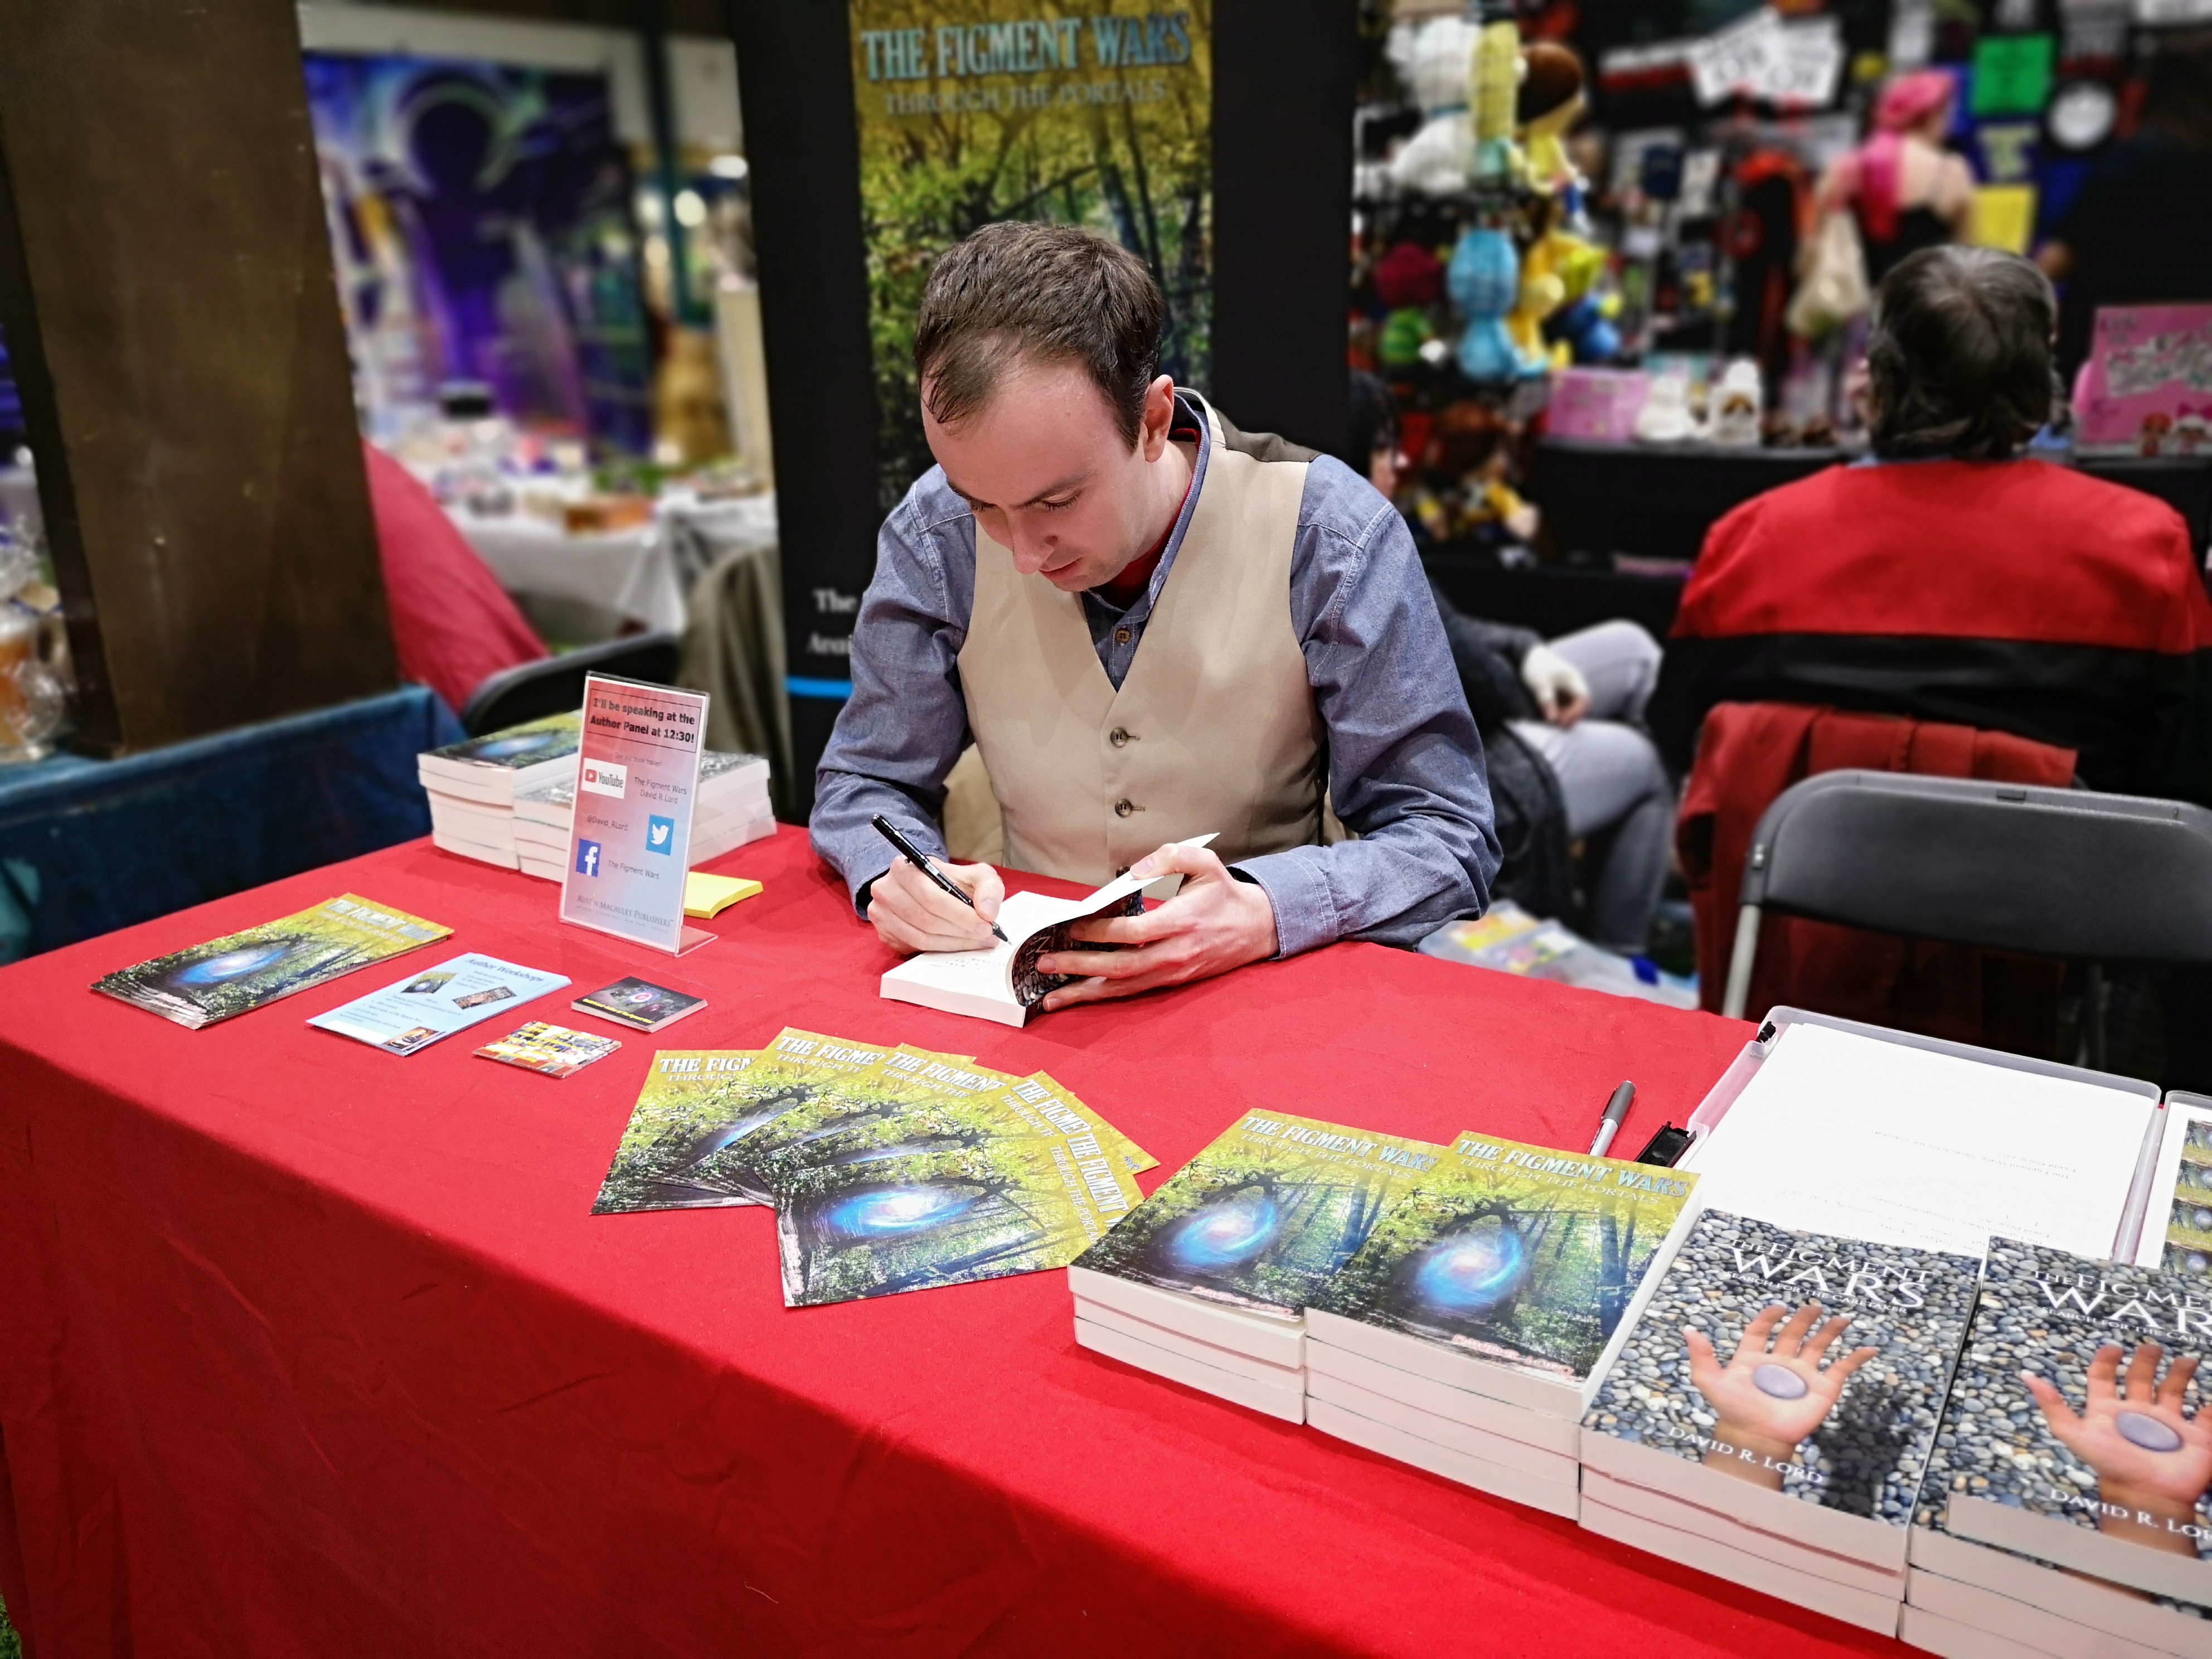 Author of The Figment Wars Attends the Bristol Comic Con and Gaming Festival